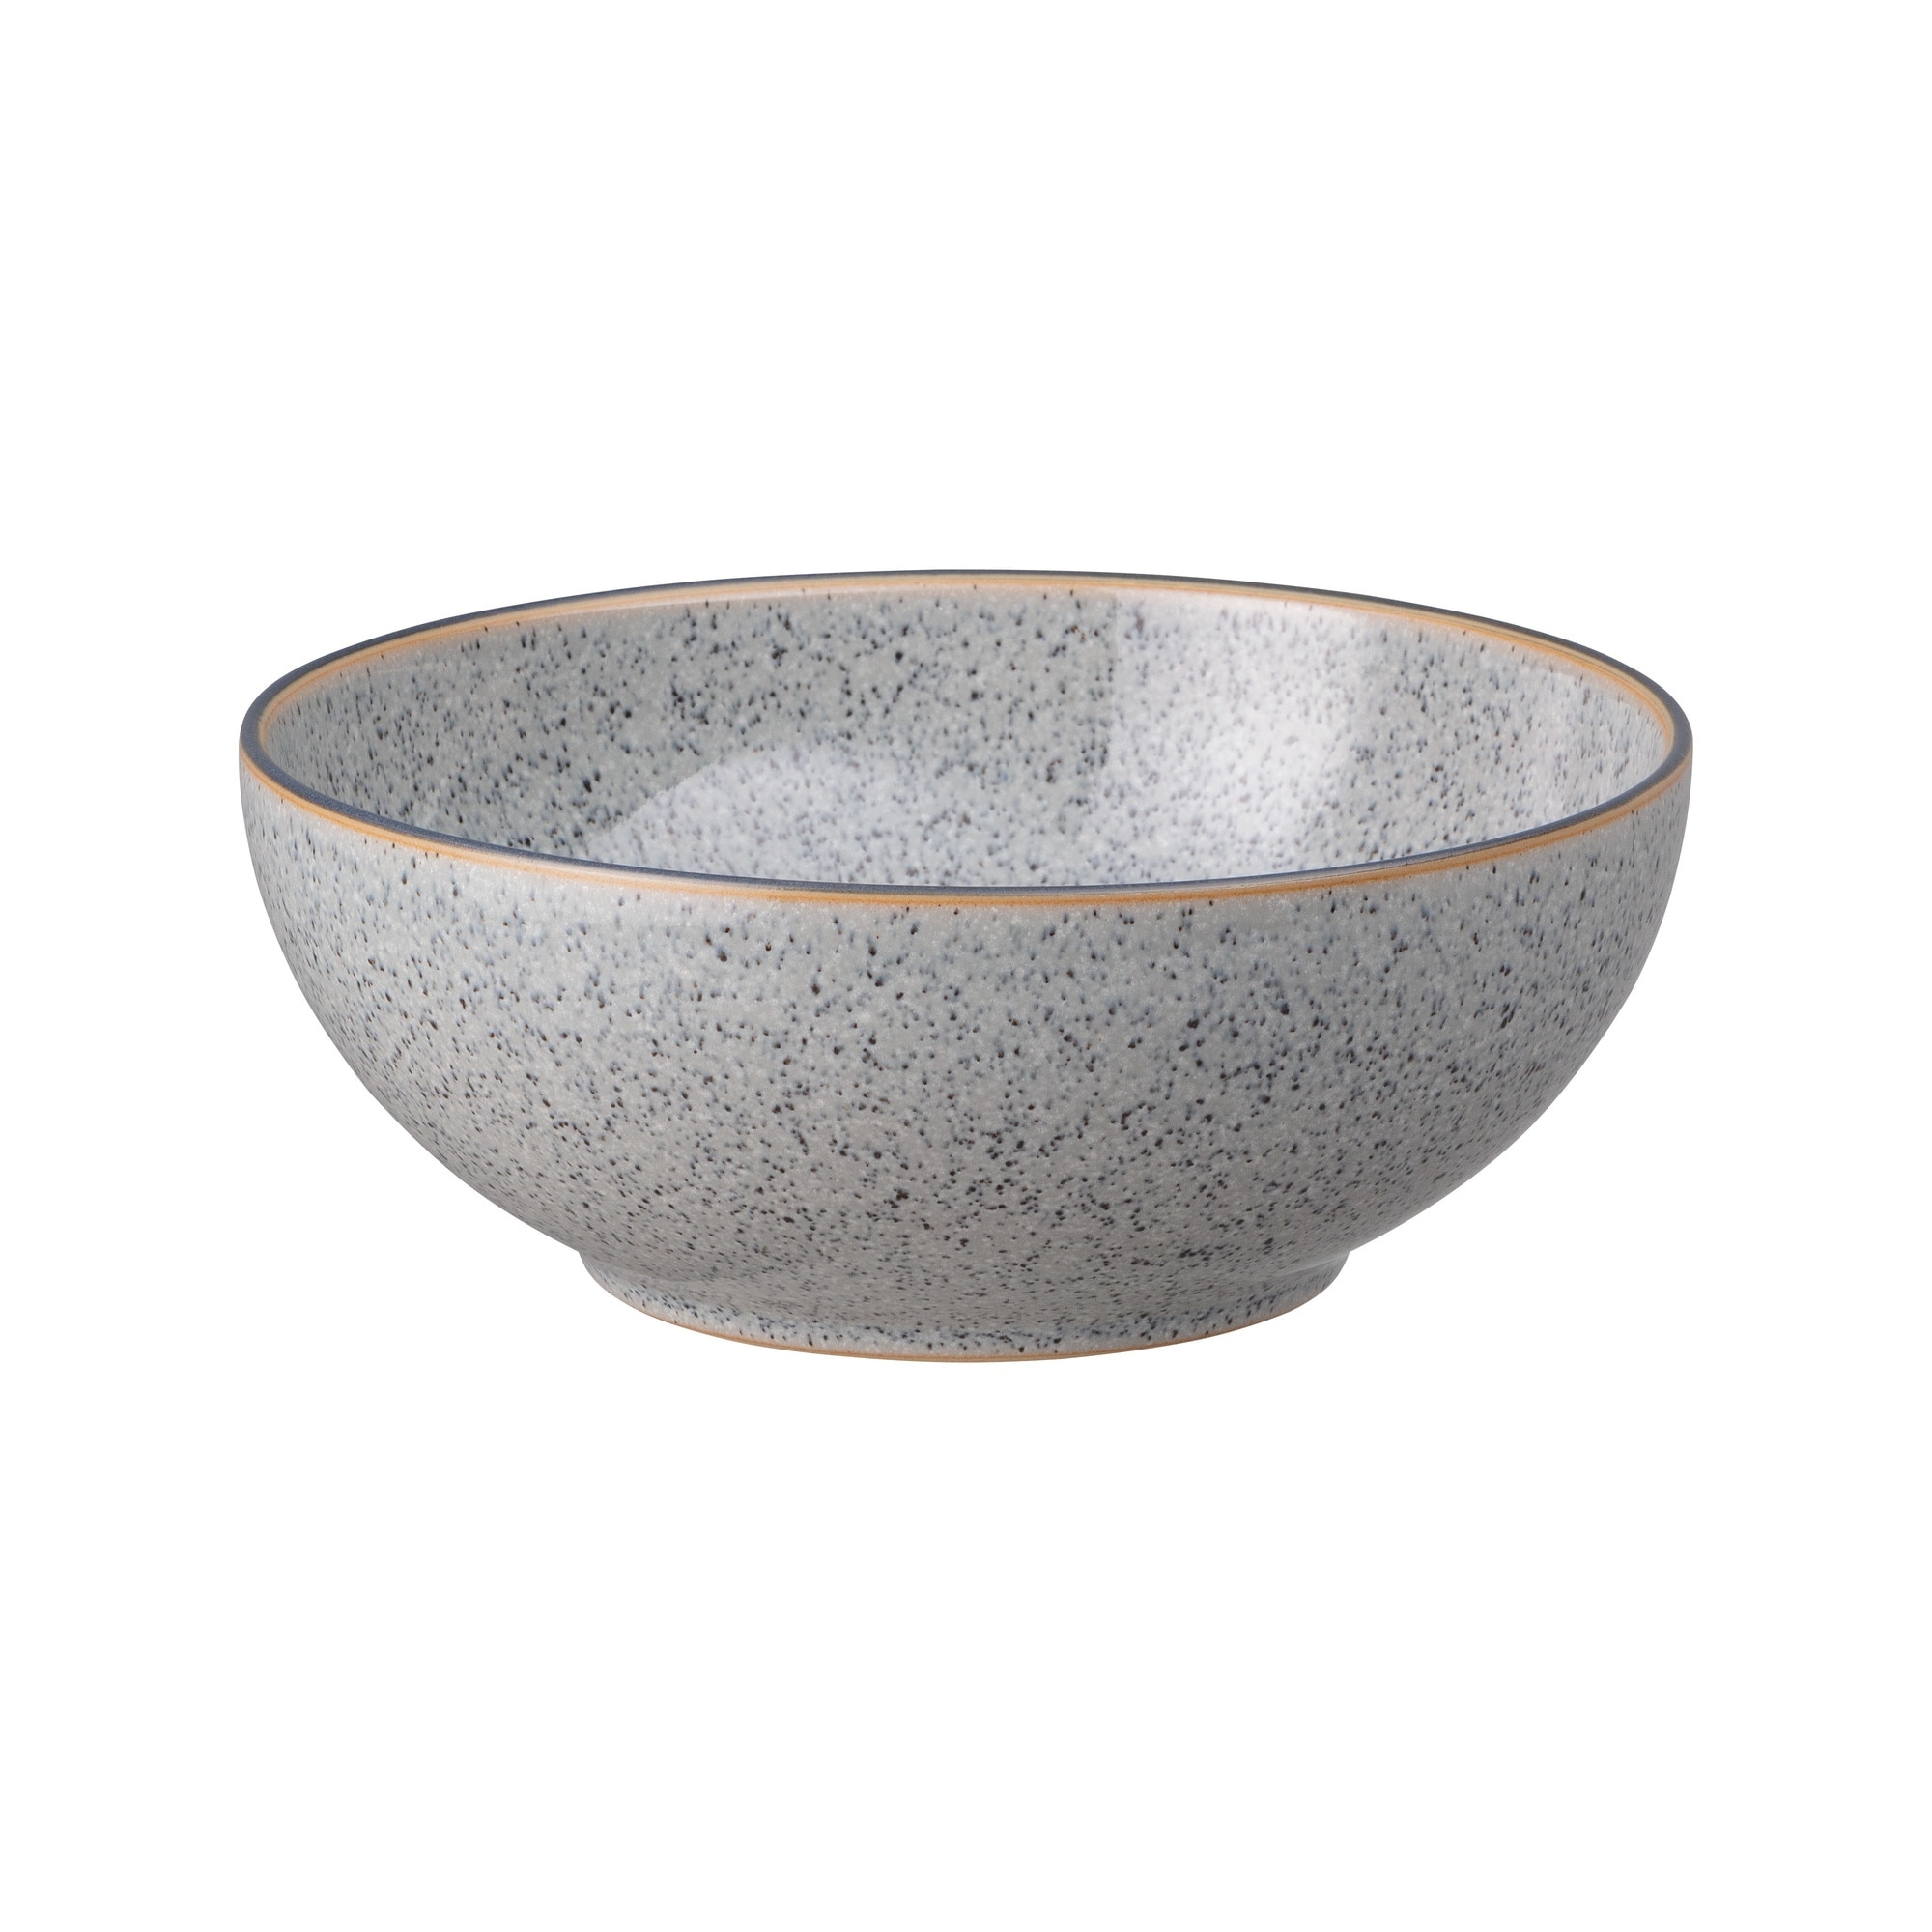 Studio Grey Coupe Cereal Bowl